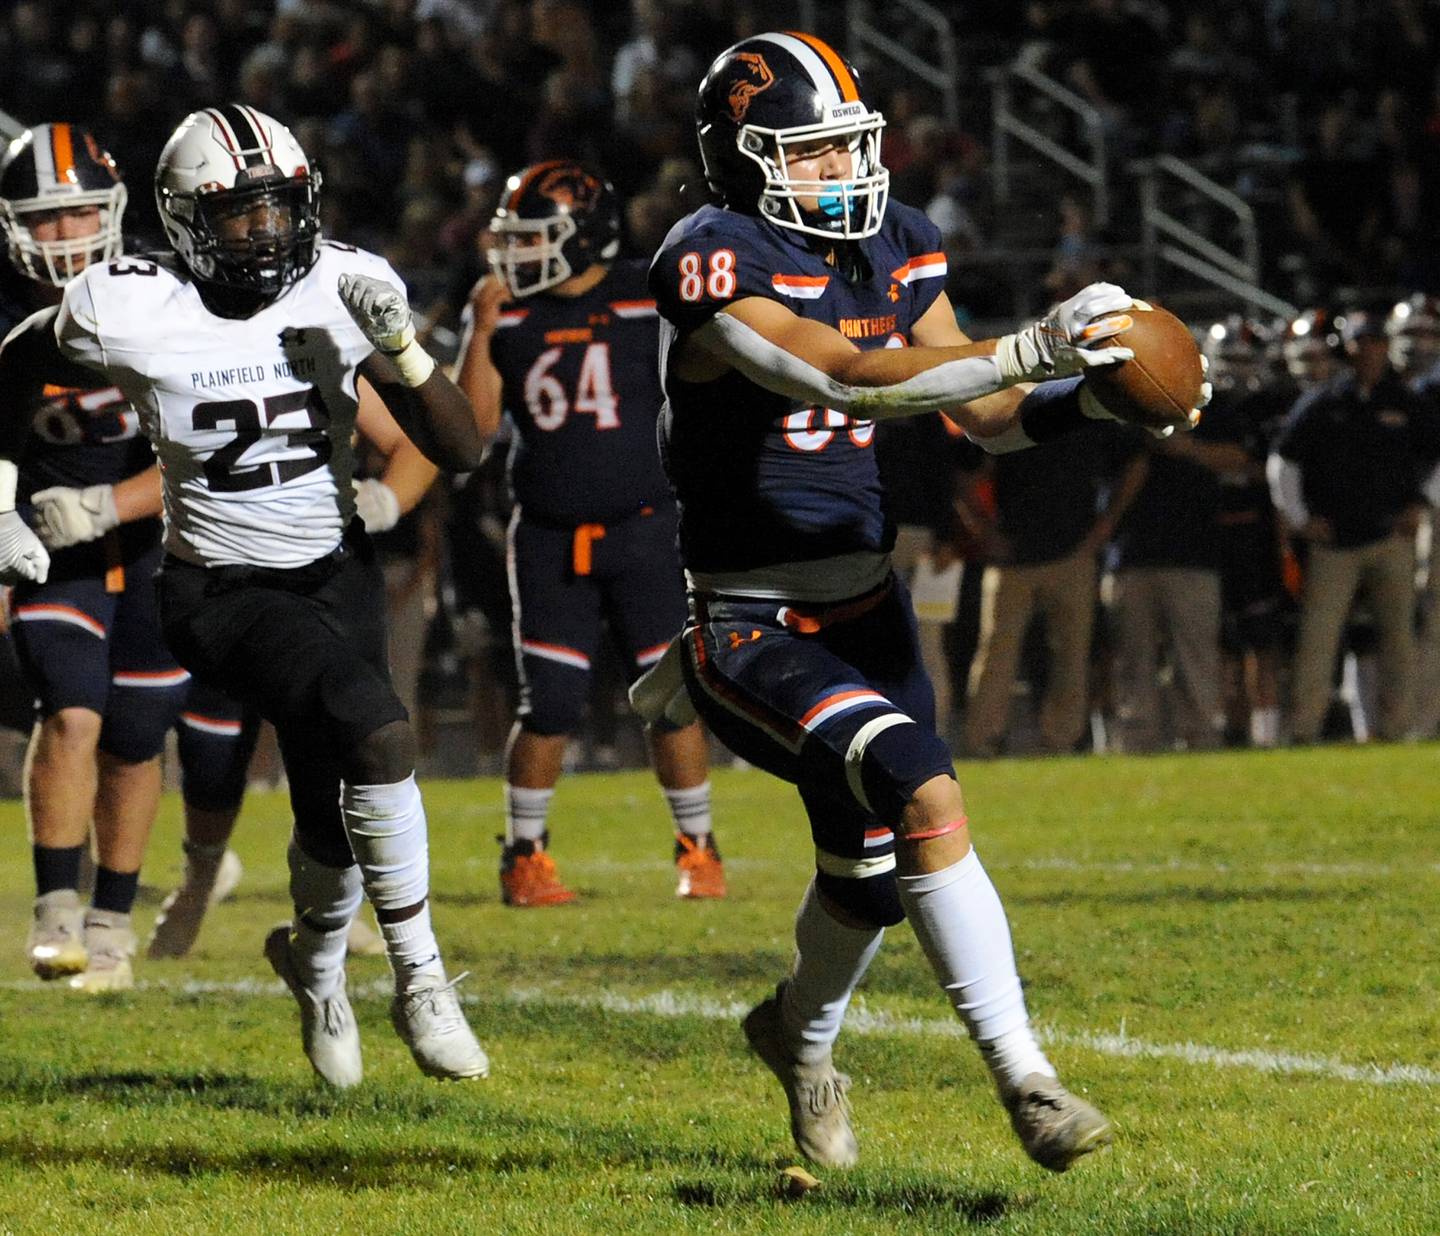 Oswego tight end Deakon Tonielli (88) nabs a reception in front of Plainfield North line backer Gerald Floyd (23) for an easy touchdown during a varsity football game at Oswego High School on Friday.